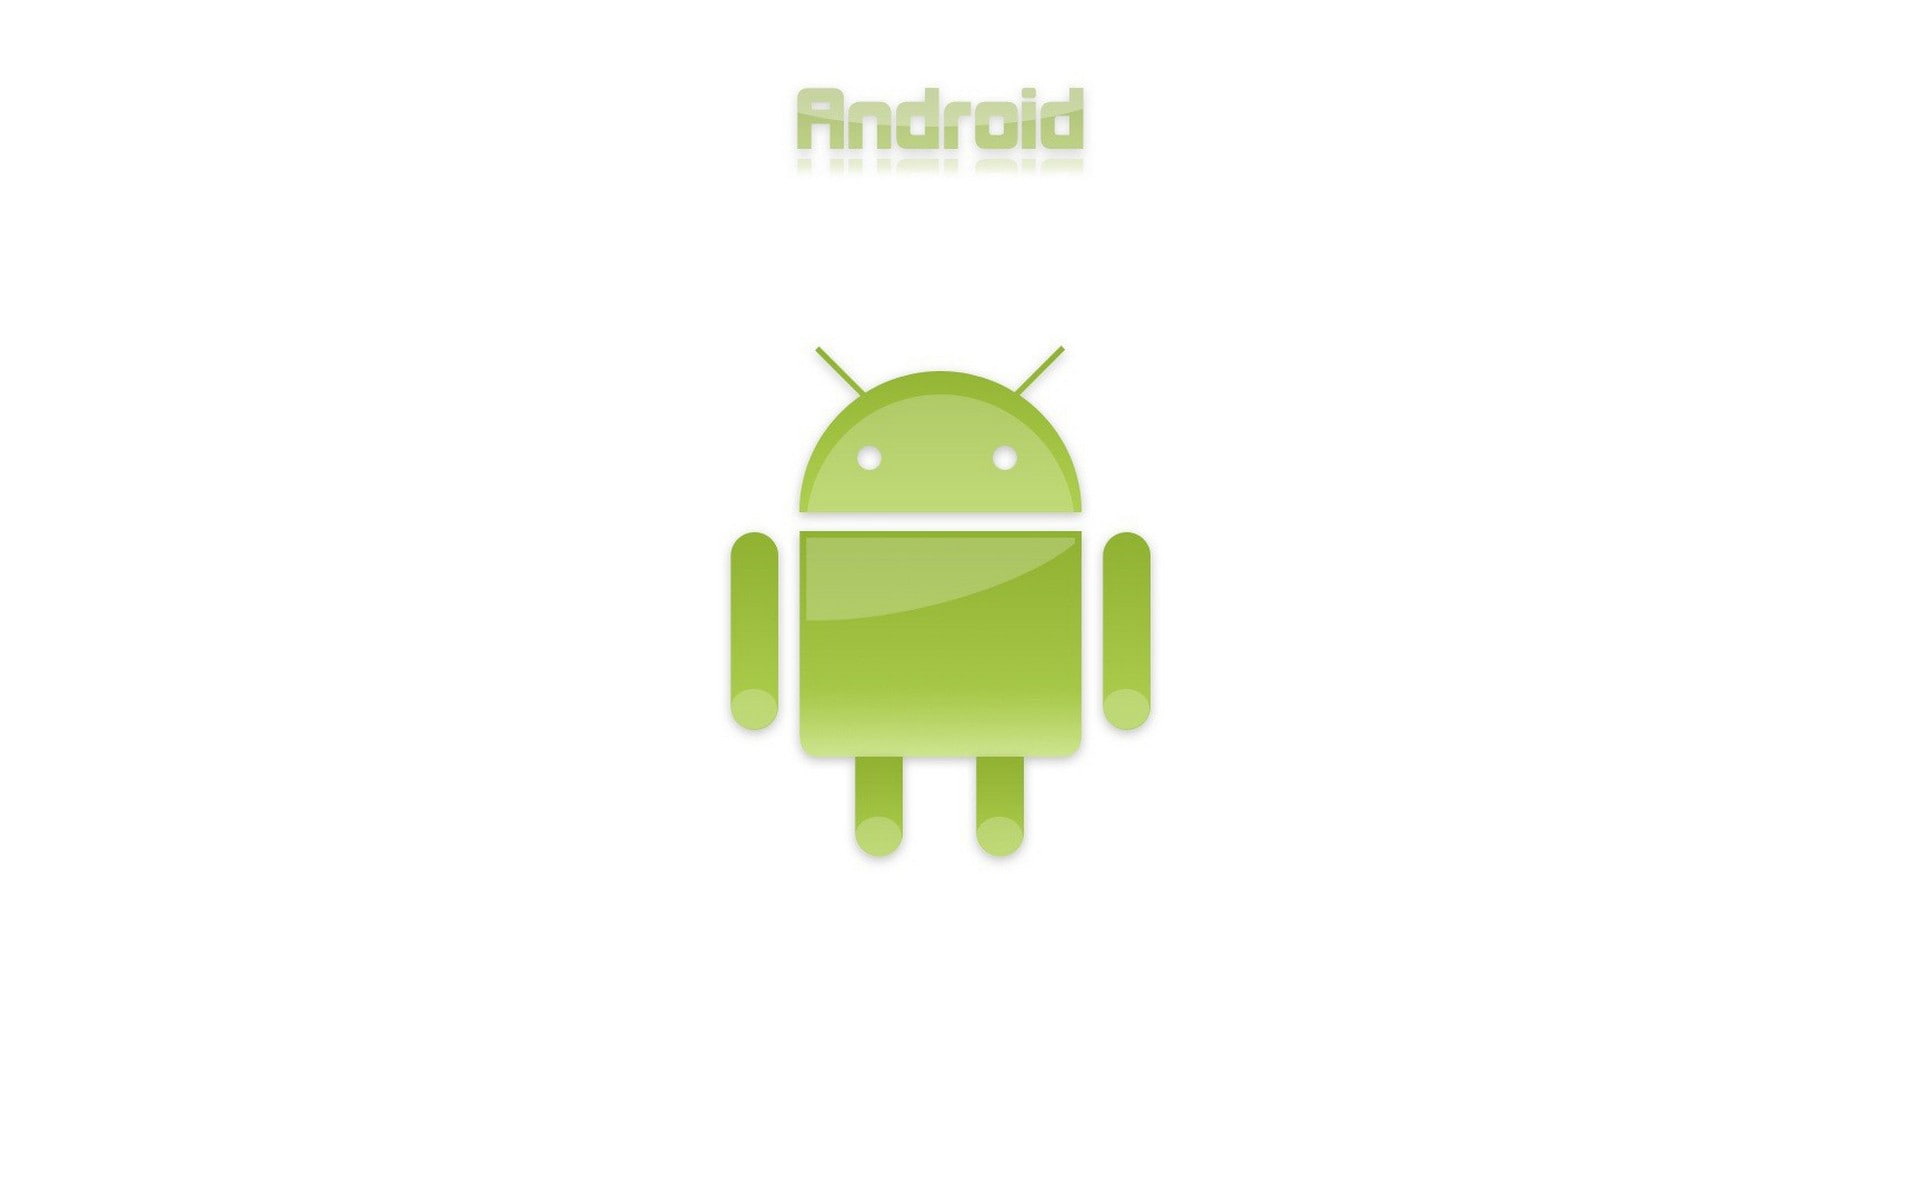 Android (operating system), green color, studio shot, white background